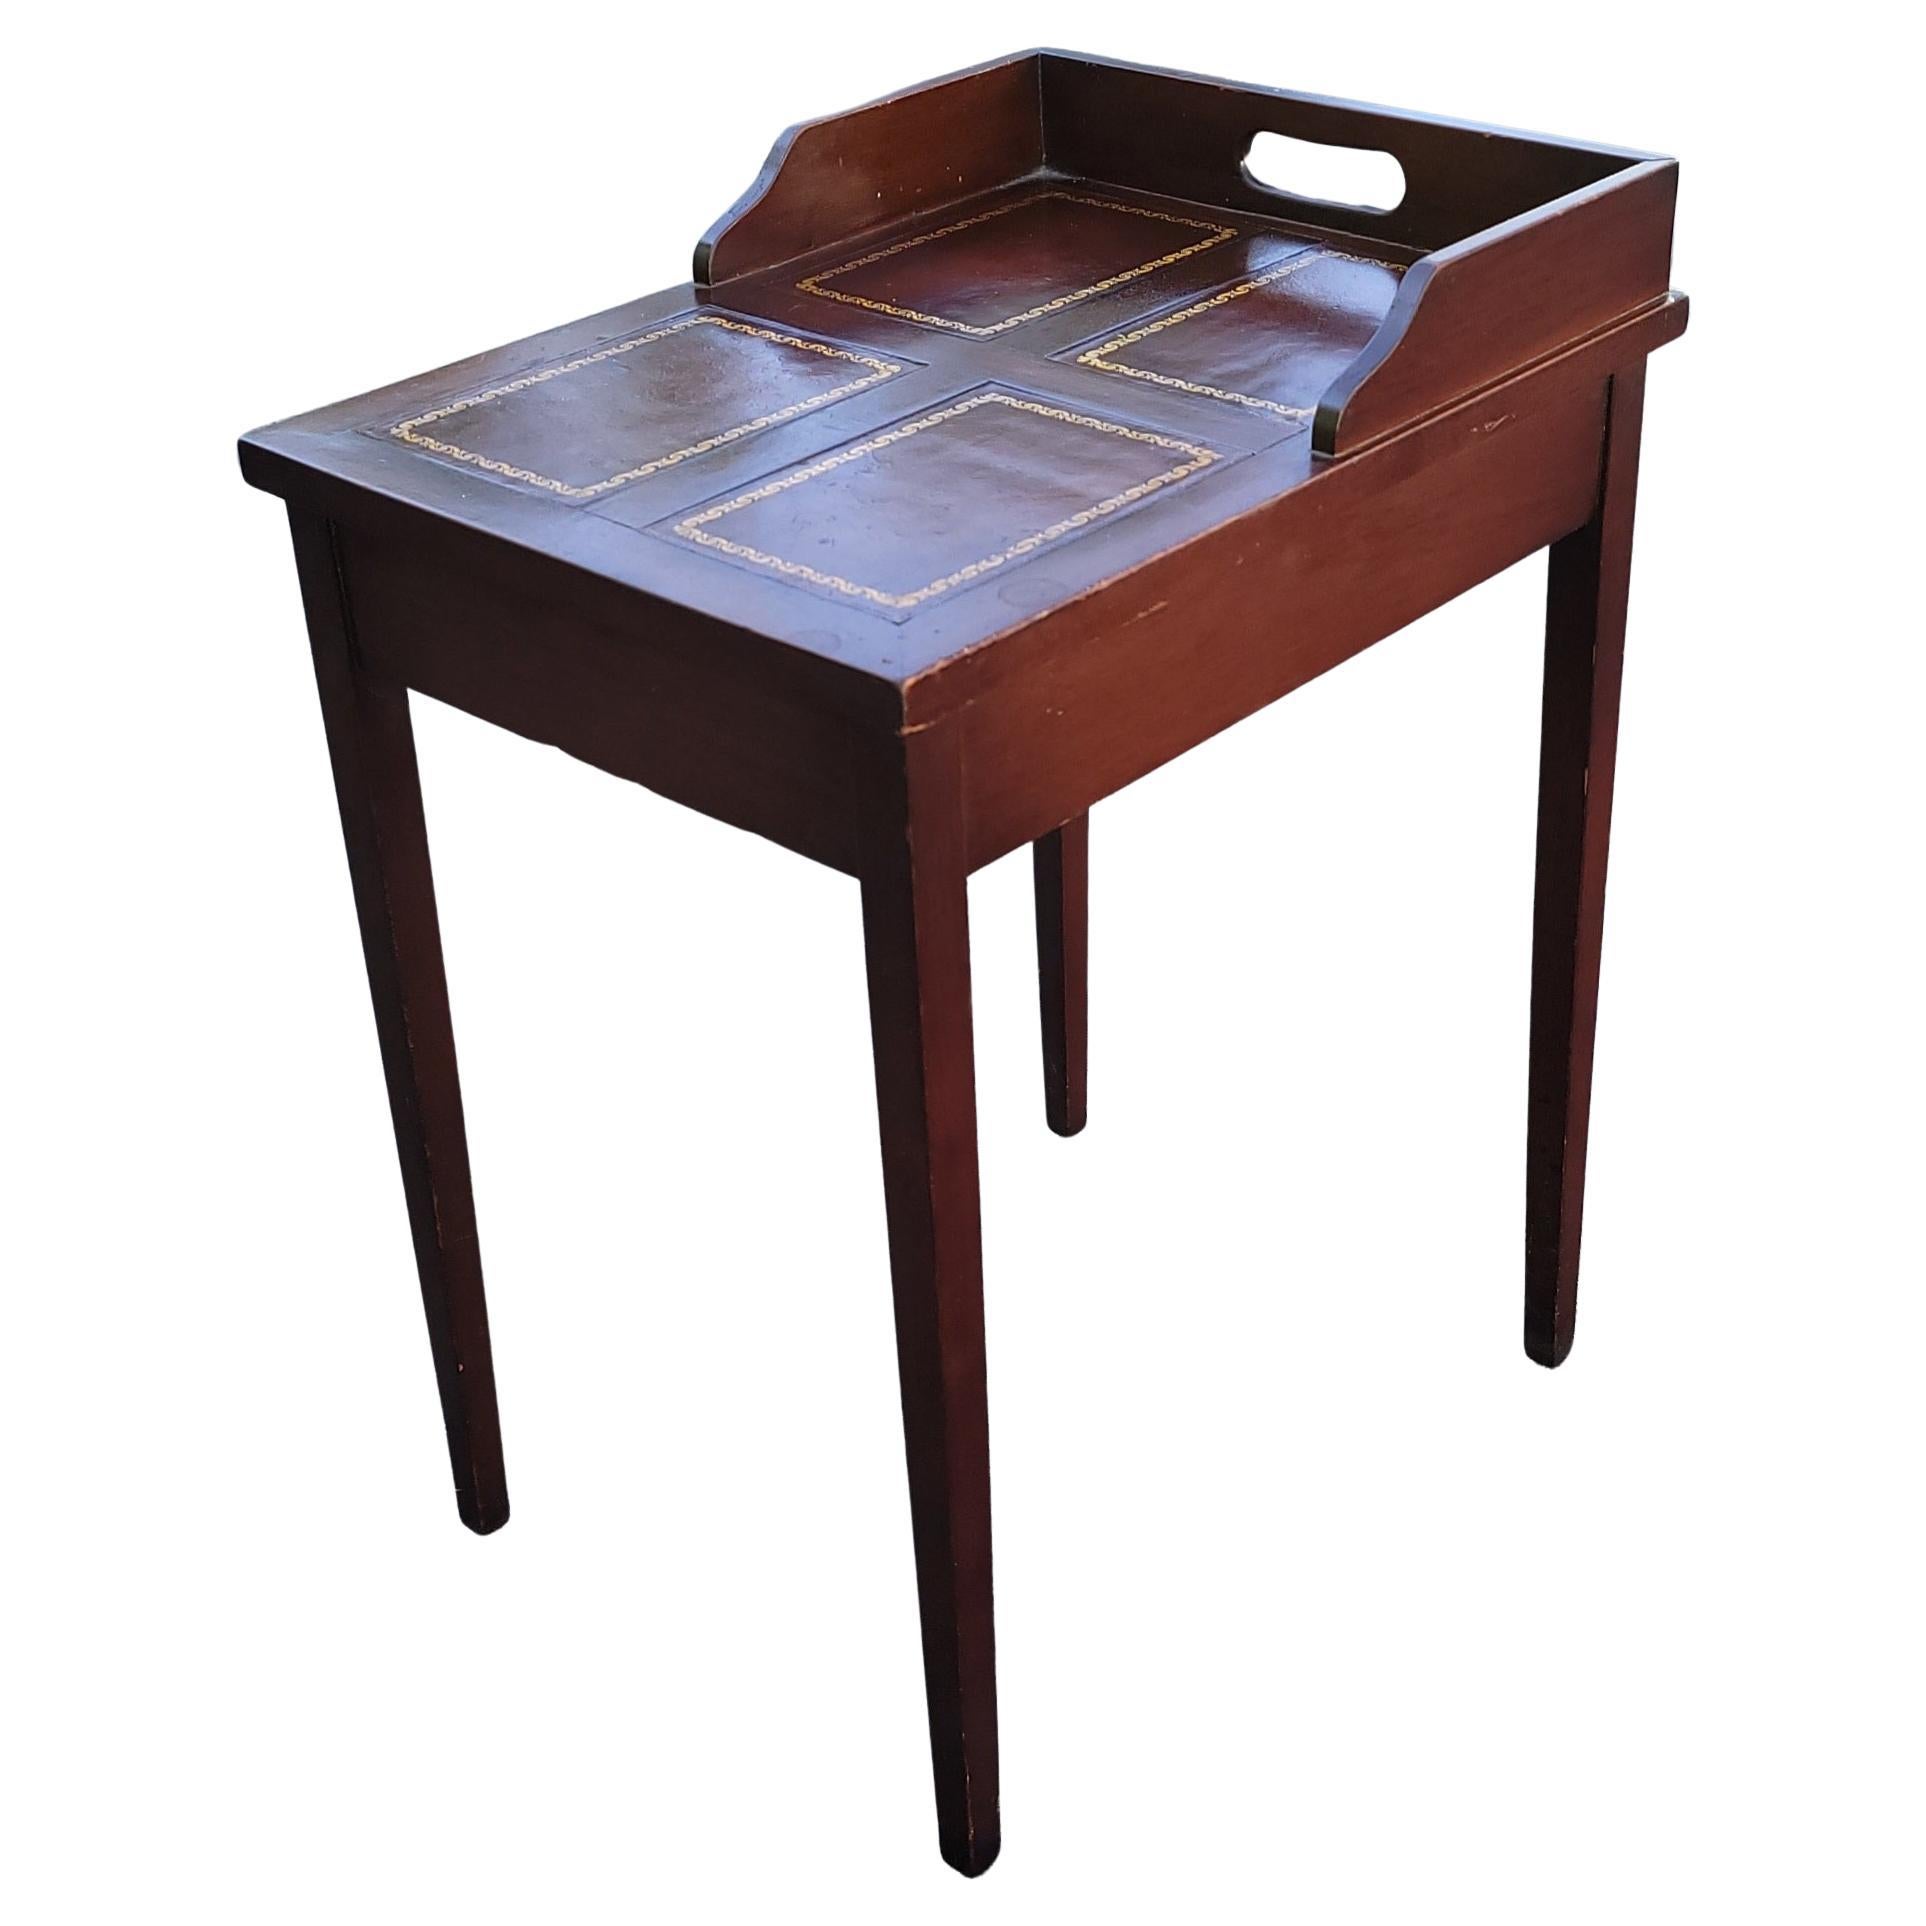 Woodwork Mid-Century Mahogany Stinciled Leather Top Candle Stand Side Table For Sale